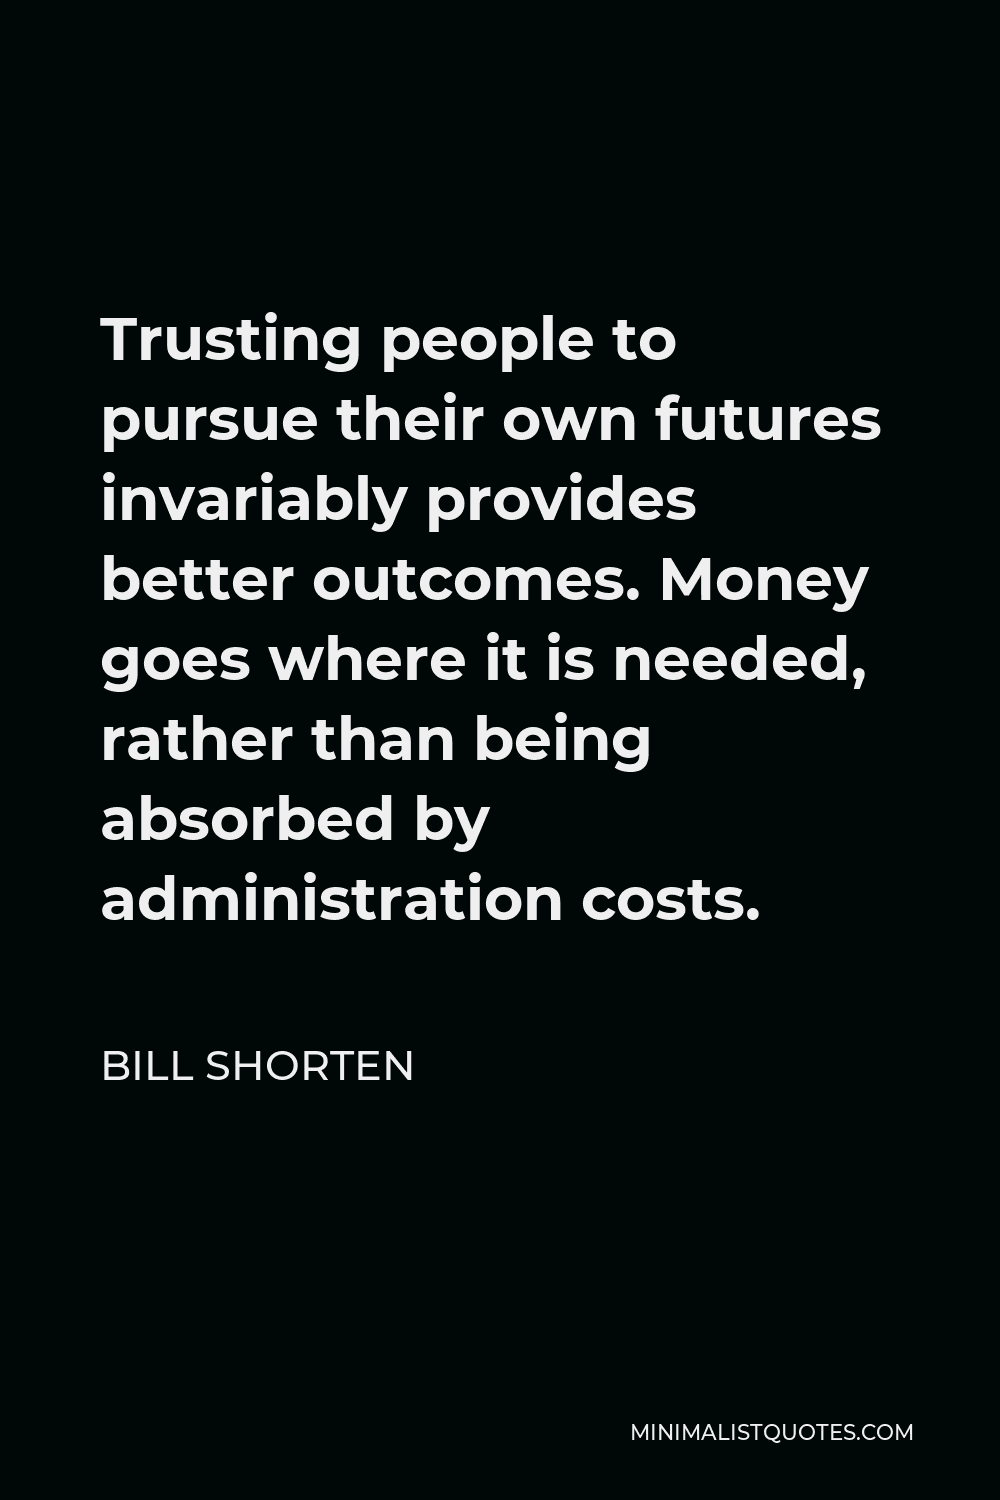 Bill Shorten Quote - Trusting people to pursue their own futures invariably provides better outcomes. Money goes where it is needed, rather than being absorbed by administration costs.